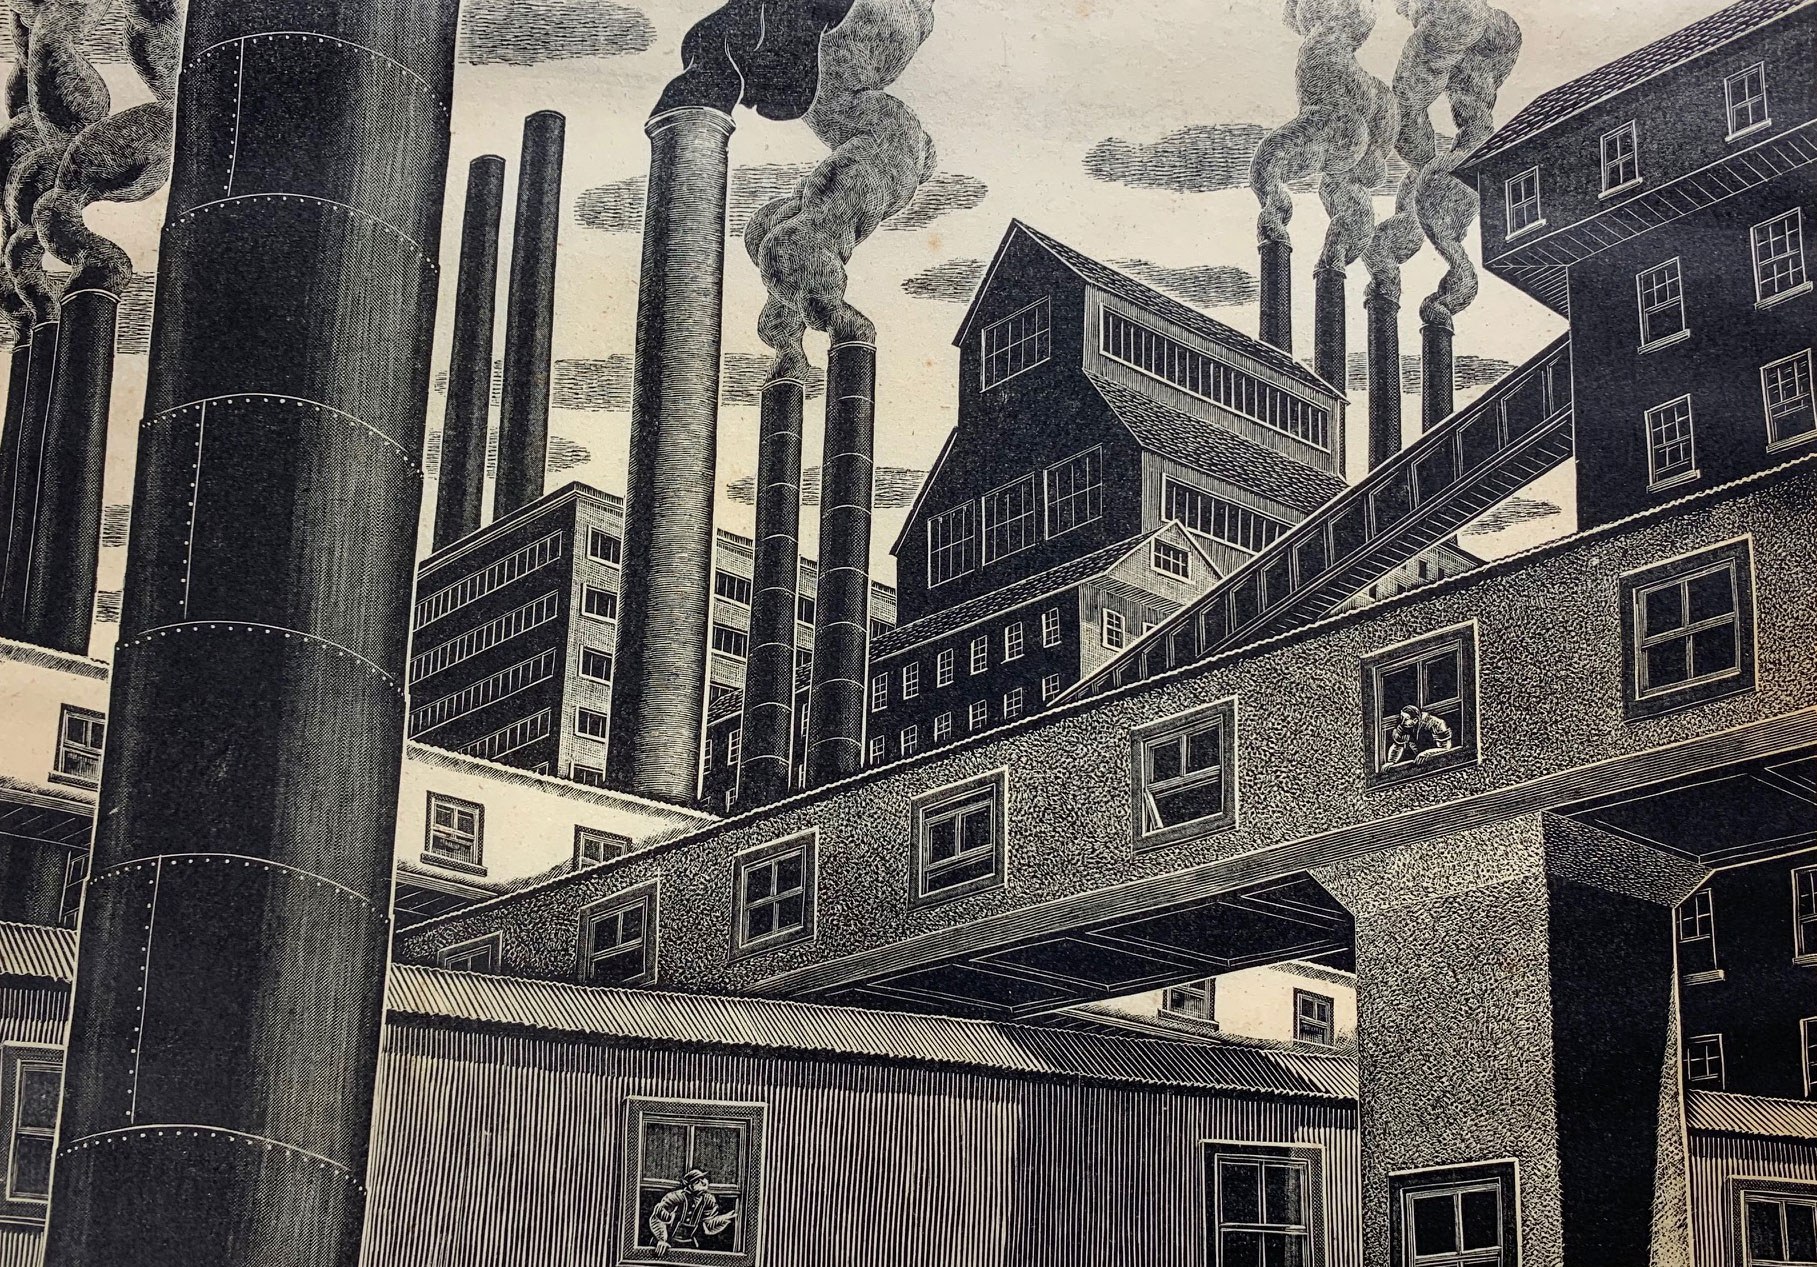 Salvatore Pinto, American, b. Italy, 1905–1966. Mills, ca. 1937. Wood engraving on paper, 7 x 10 in. Museum purchase with funds from the Collection Endowment, 2019.221.